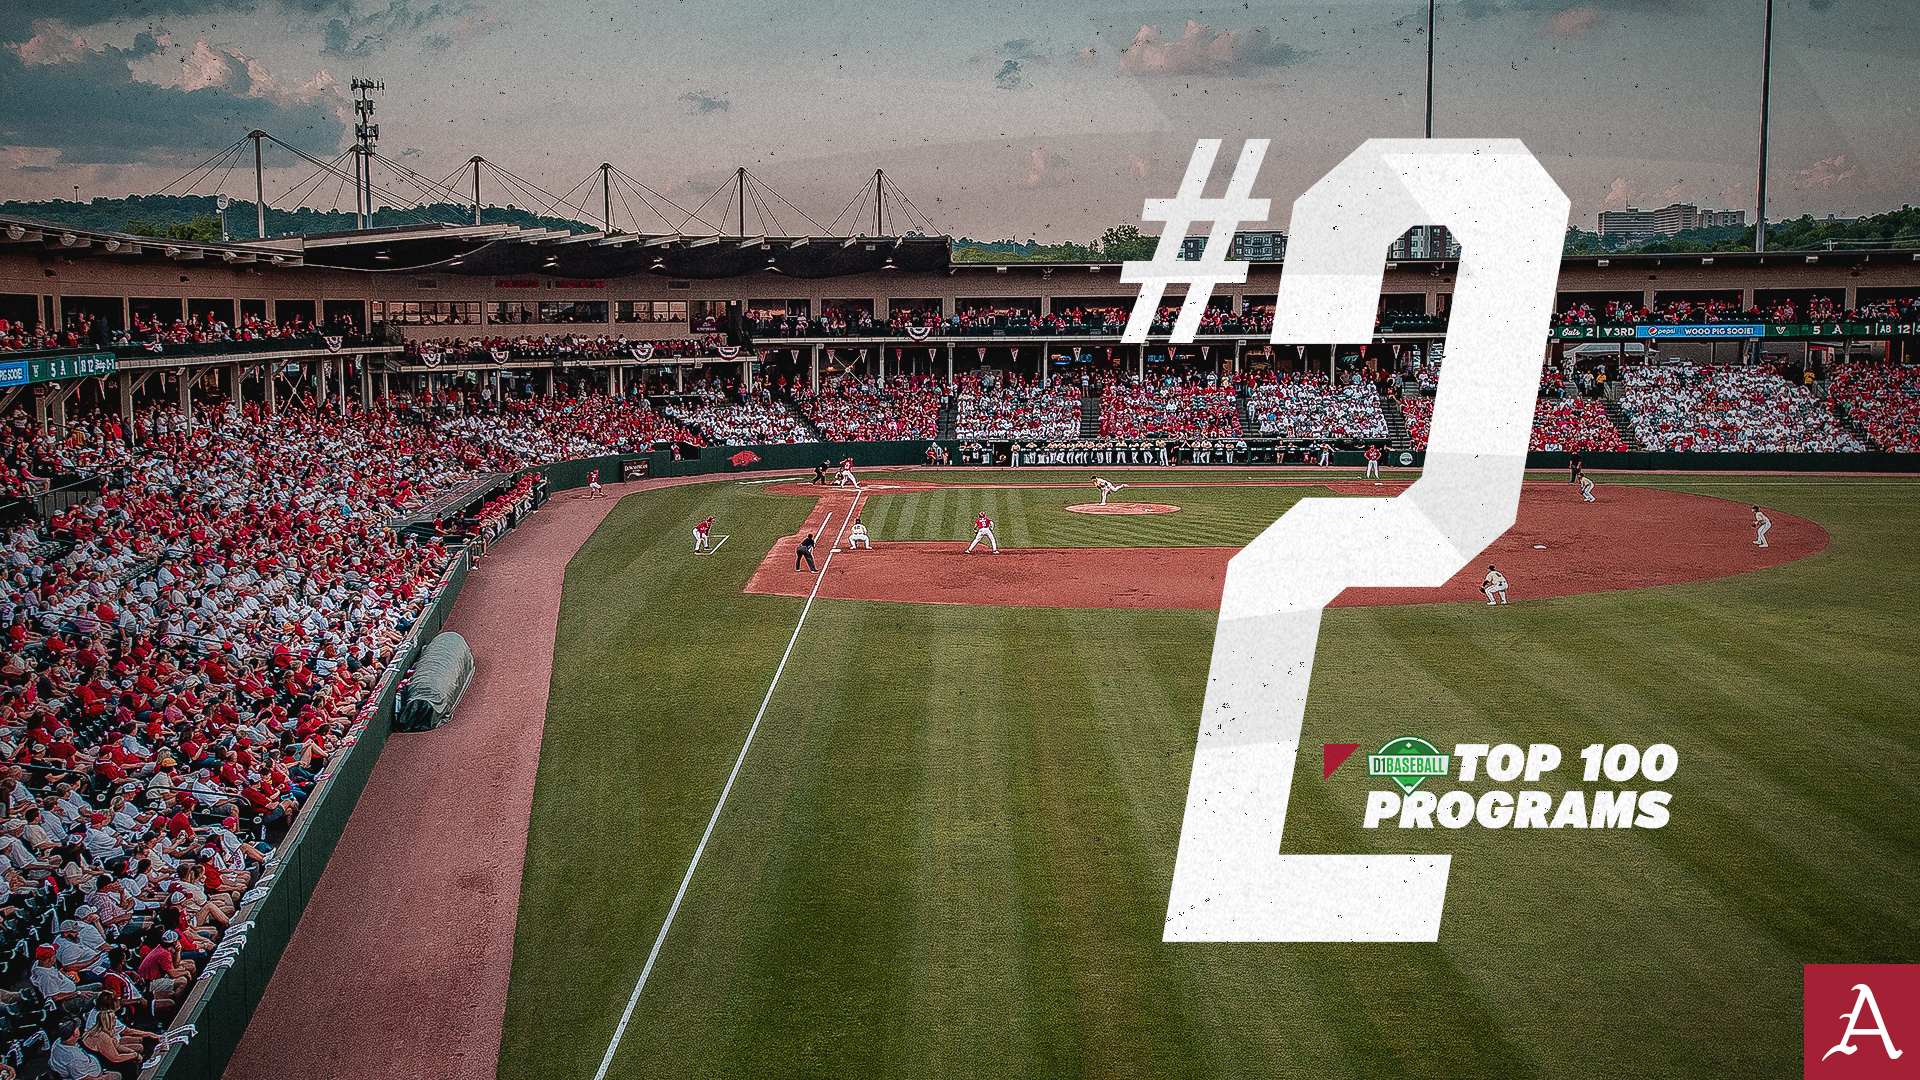 The top 100 programs in college baseball, ranked by D1baseball.com